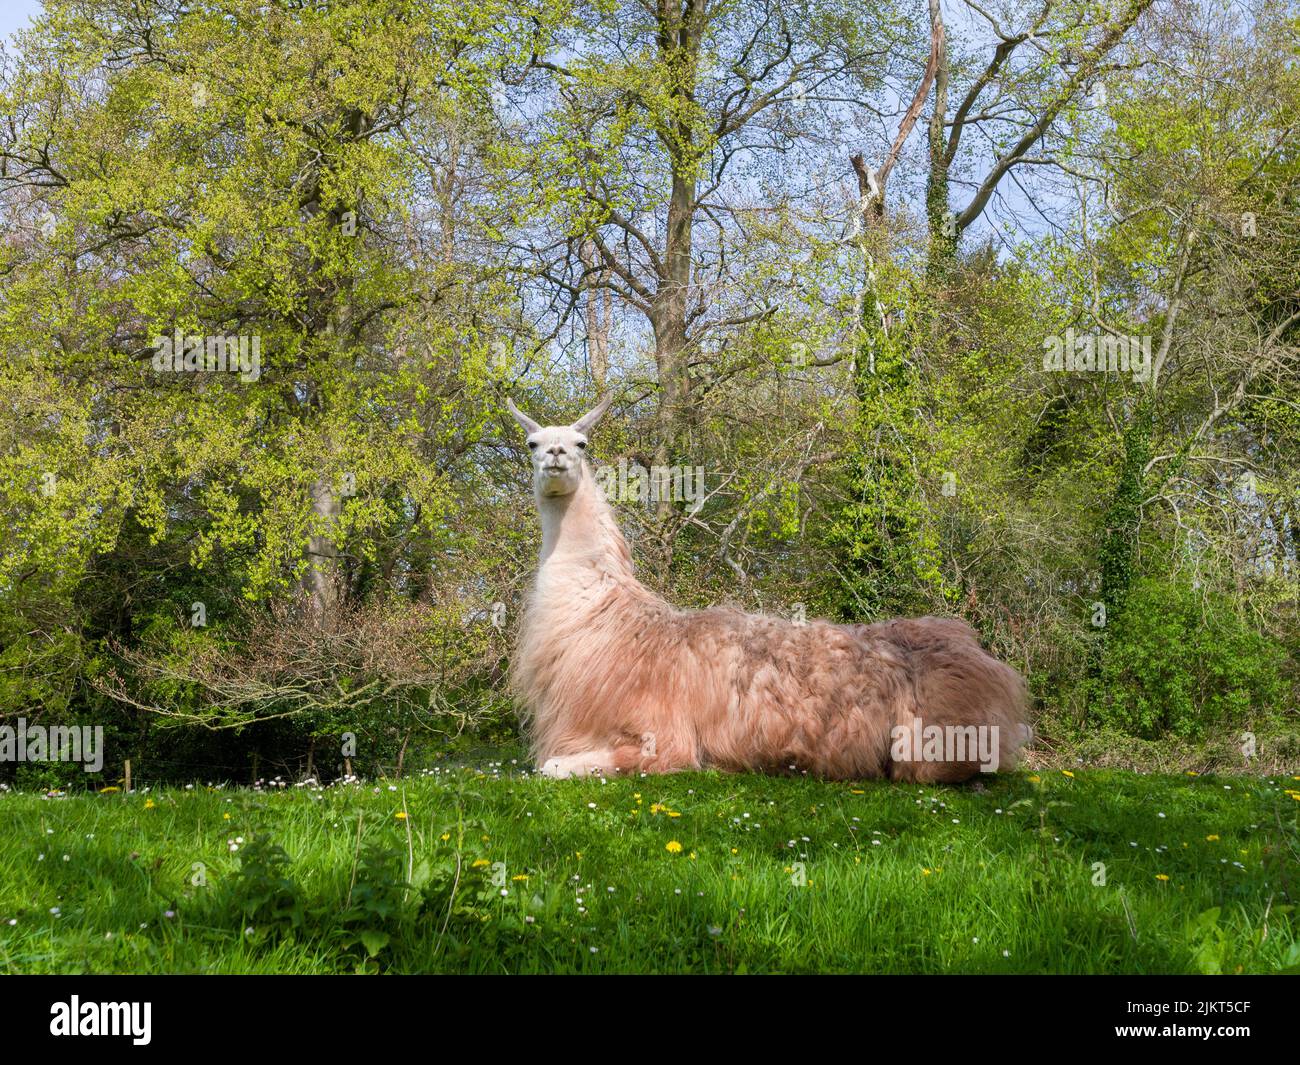 A domestic Llama (Lama glama) resting in a field in the South West of England. Stock Photo